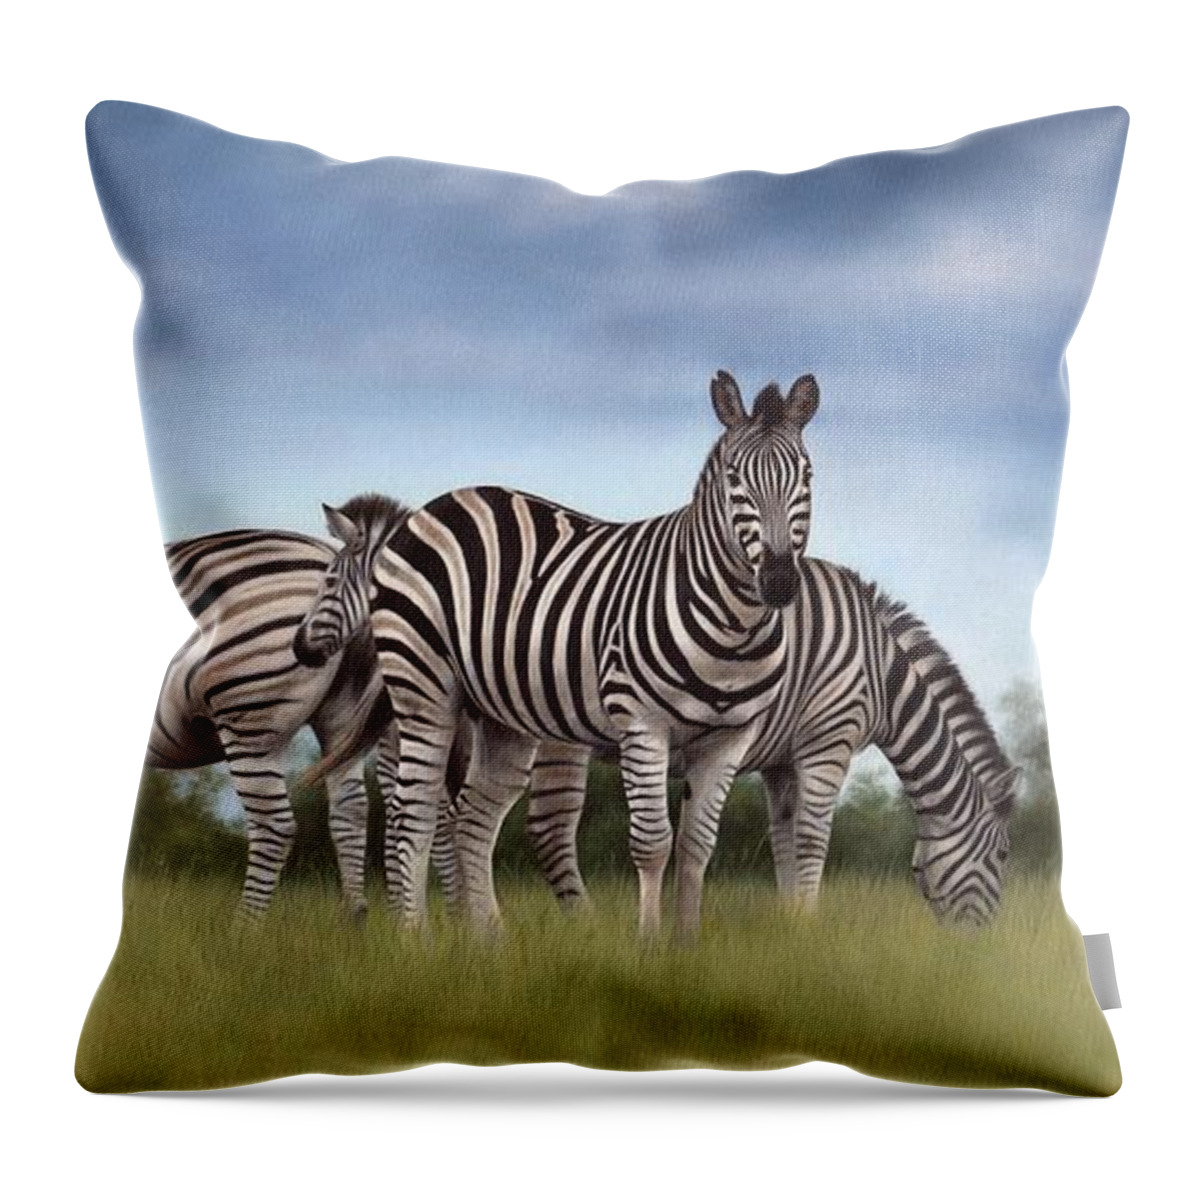 Zebras Throw Pillow featuring the painting Zebras Painting by Rachel Stribbling